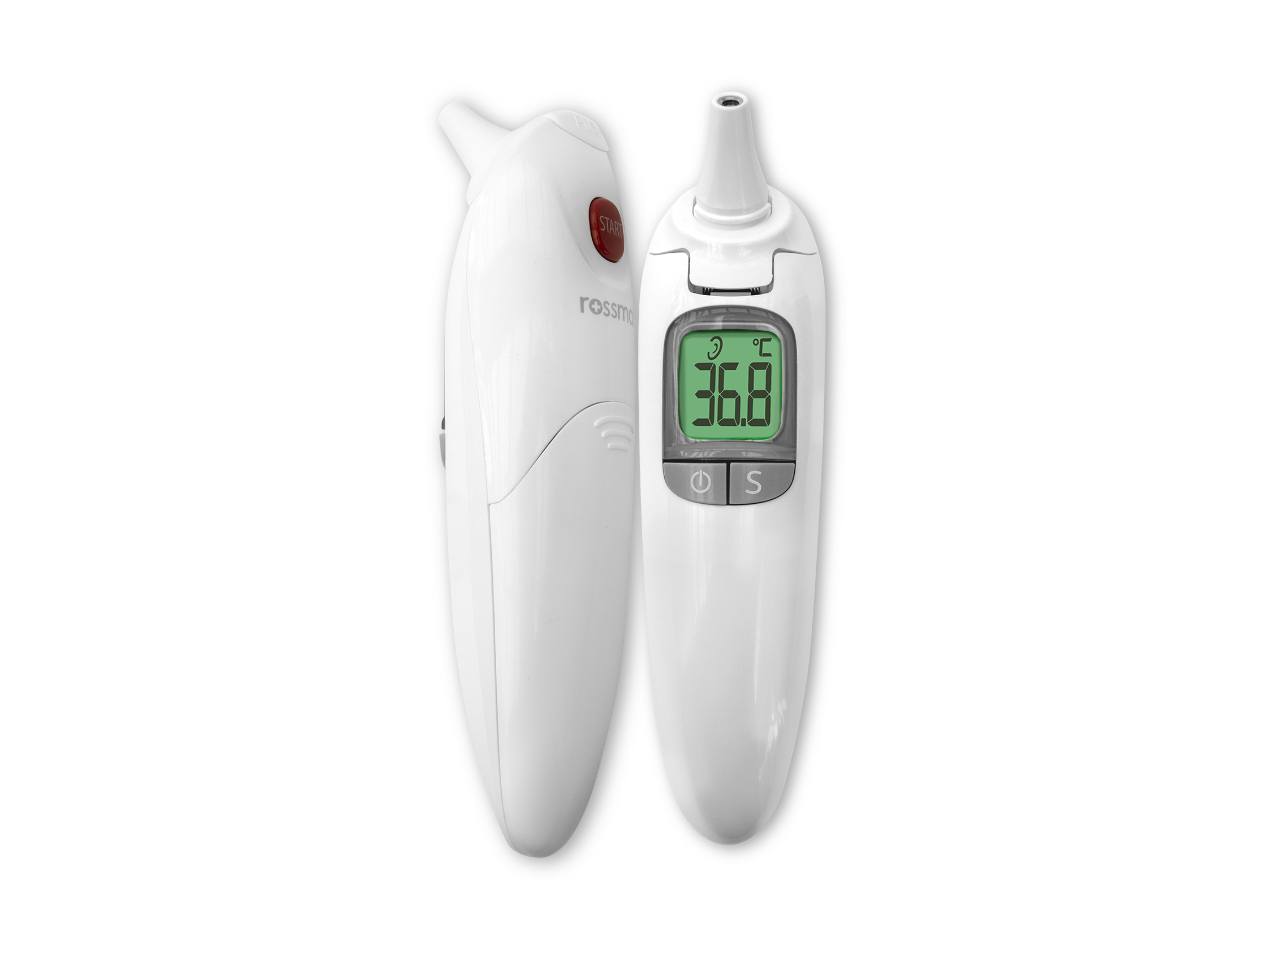 Rossmax Infrared Ear & Object Thermometer